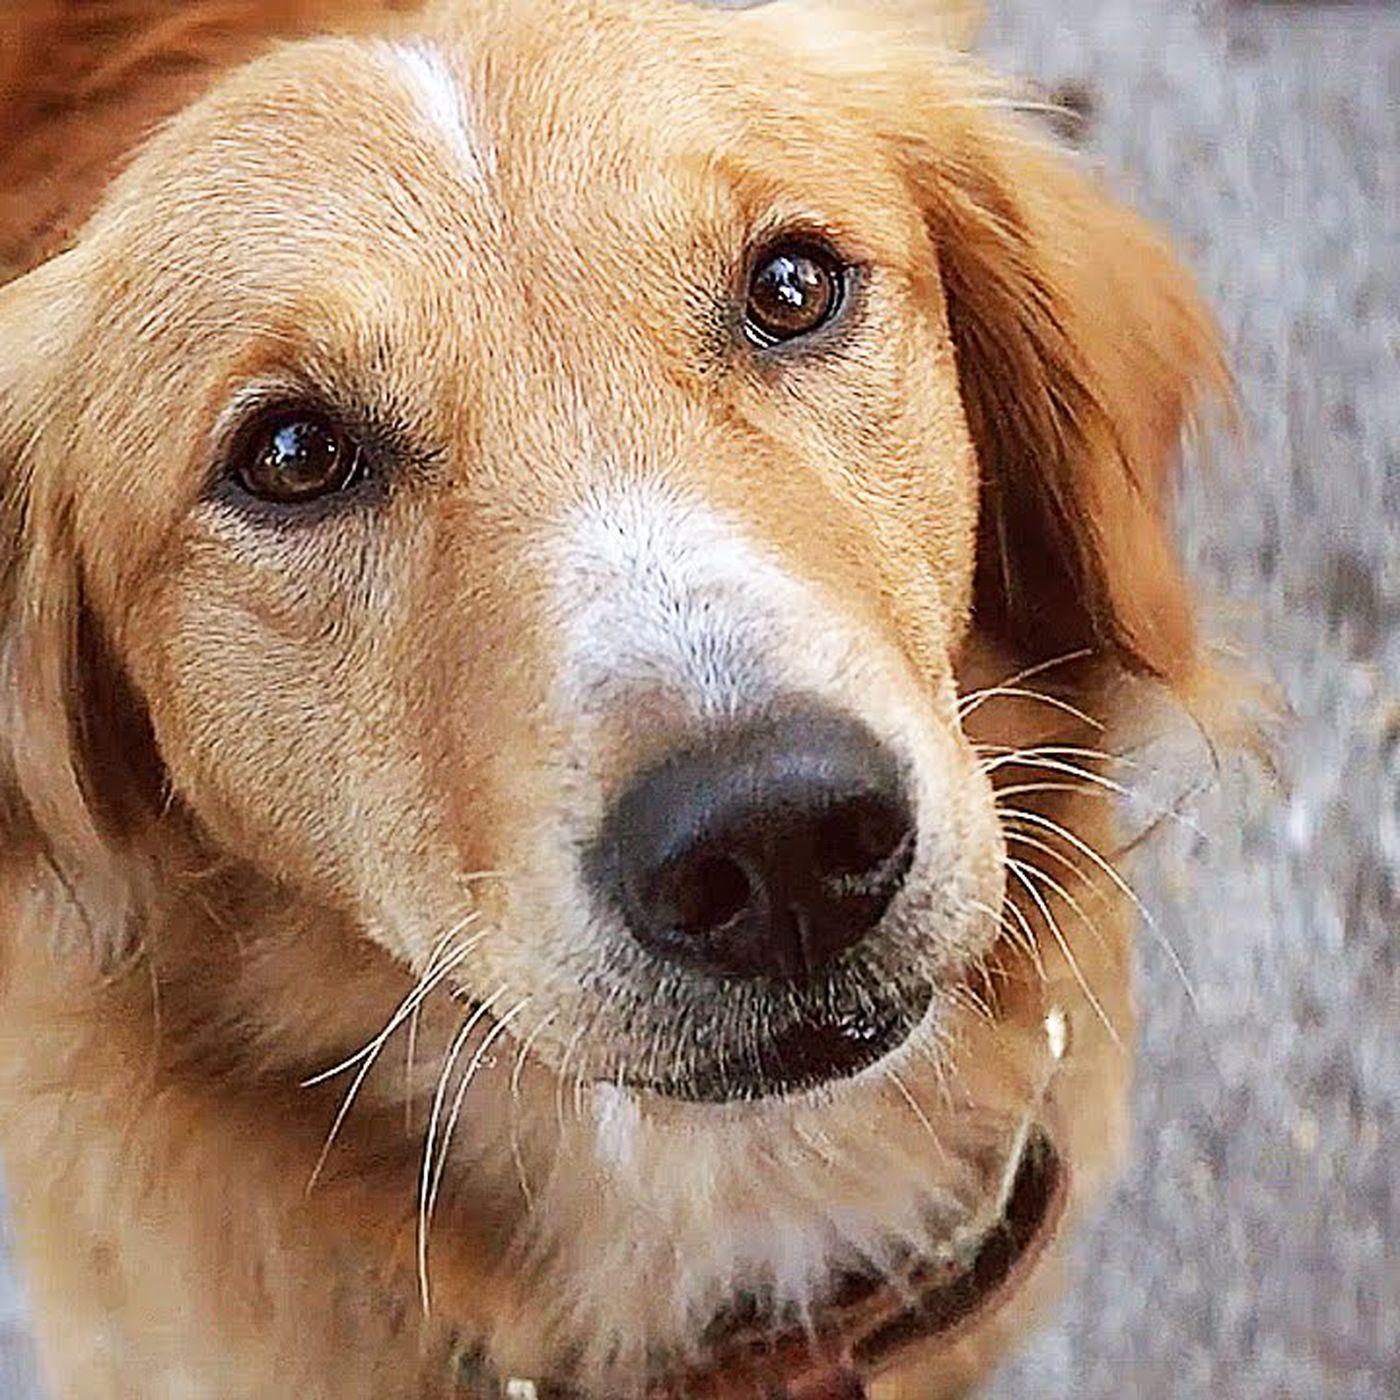 An investigation has found that the A Dog's Purpose viral video was